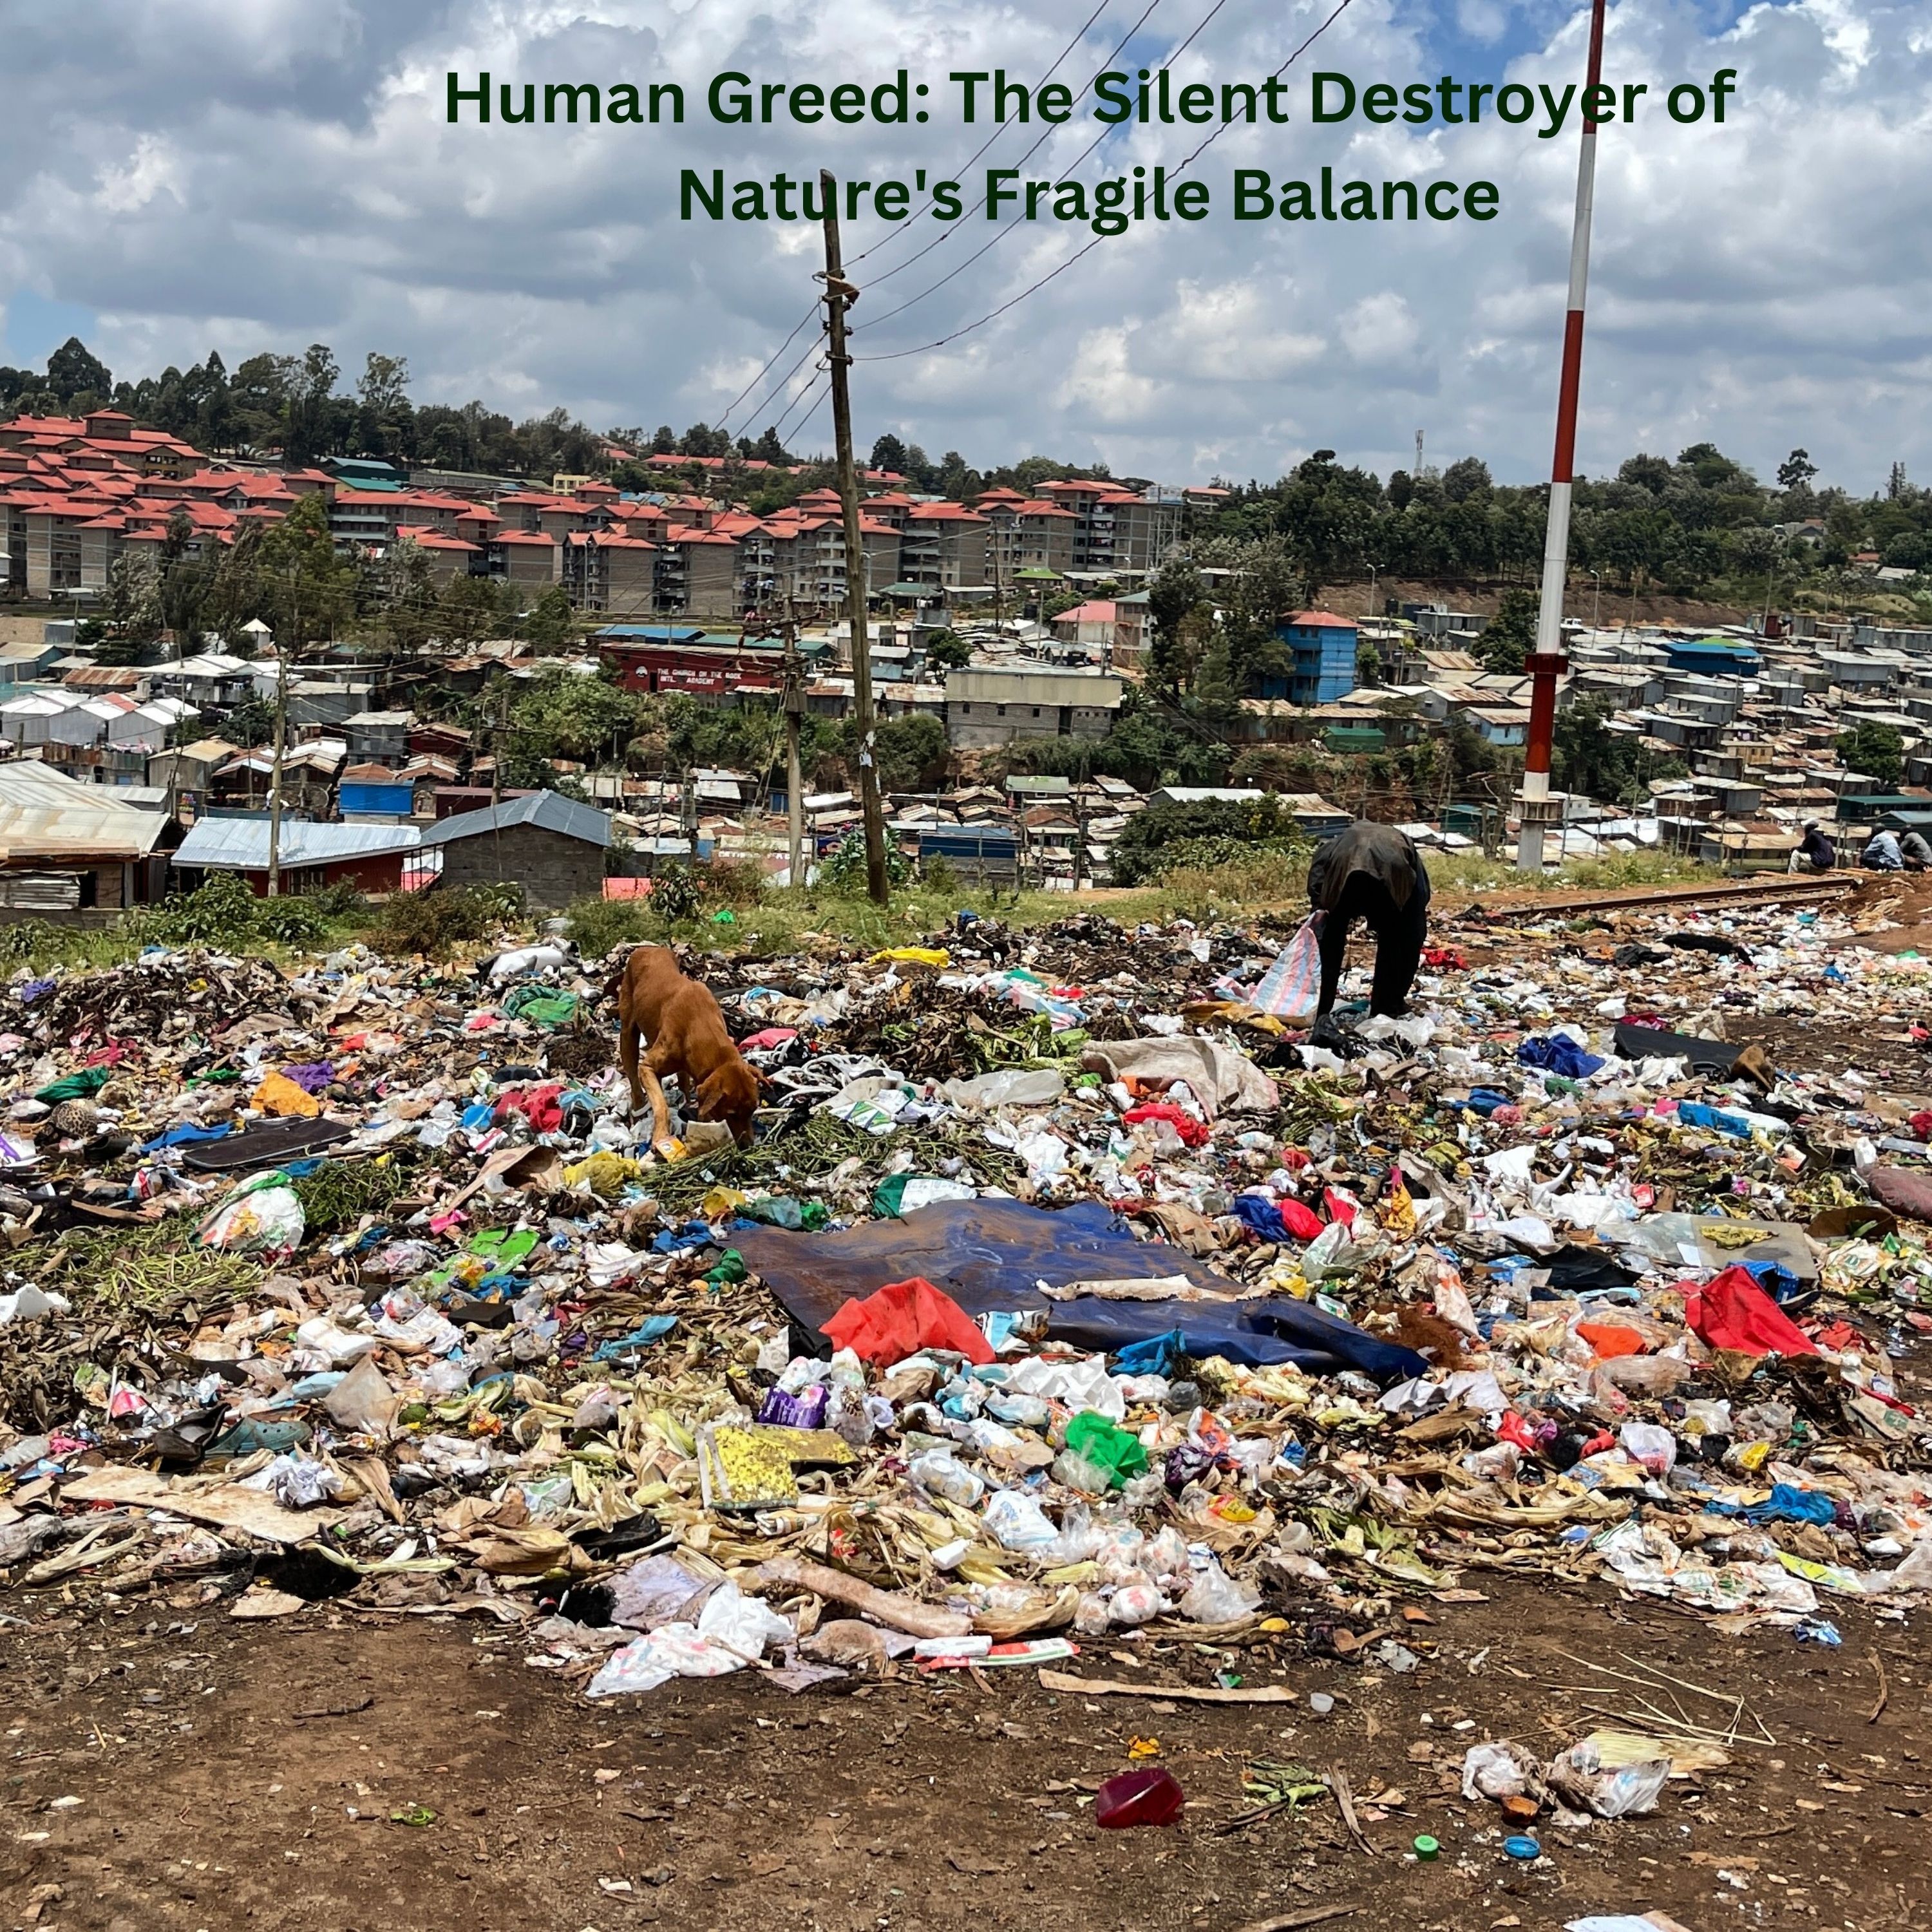 Human Greed: The Silent Destroyer of Nature's Fragile Balance